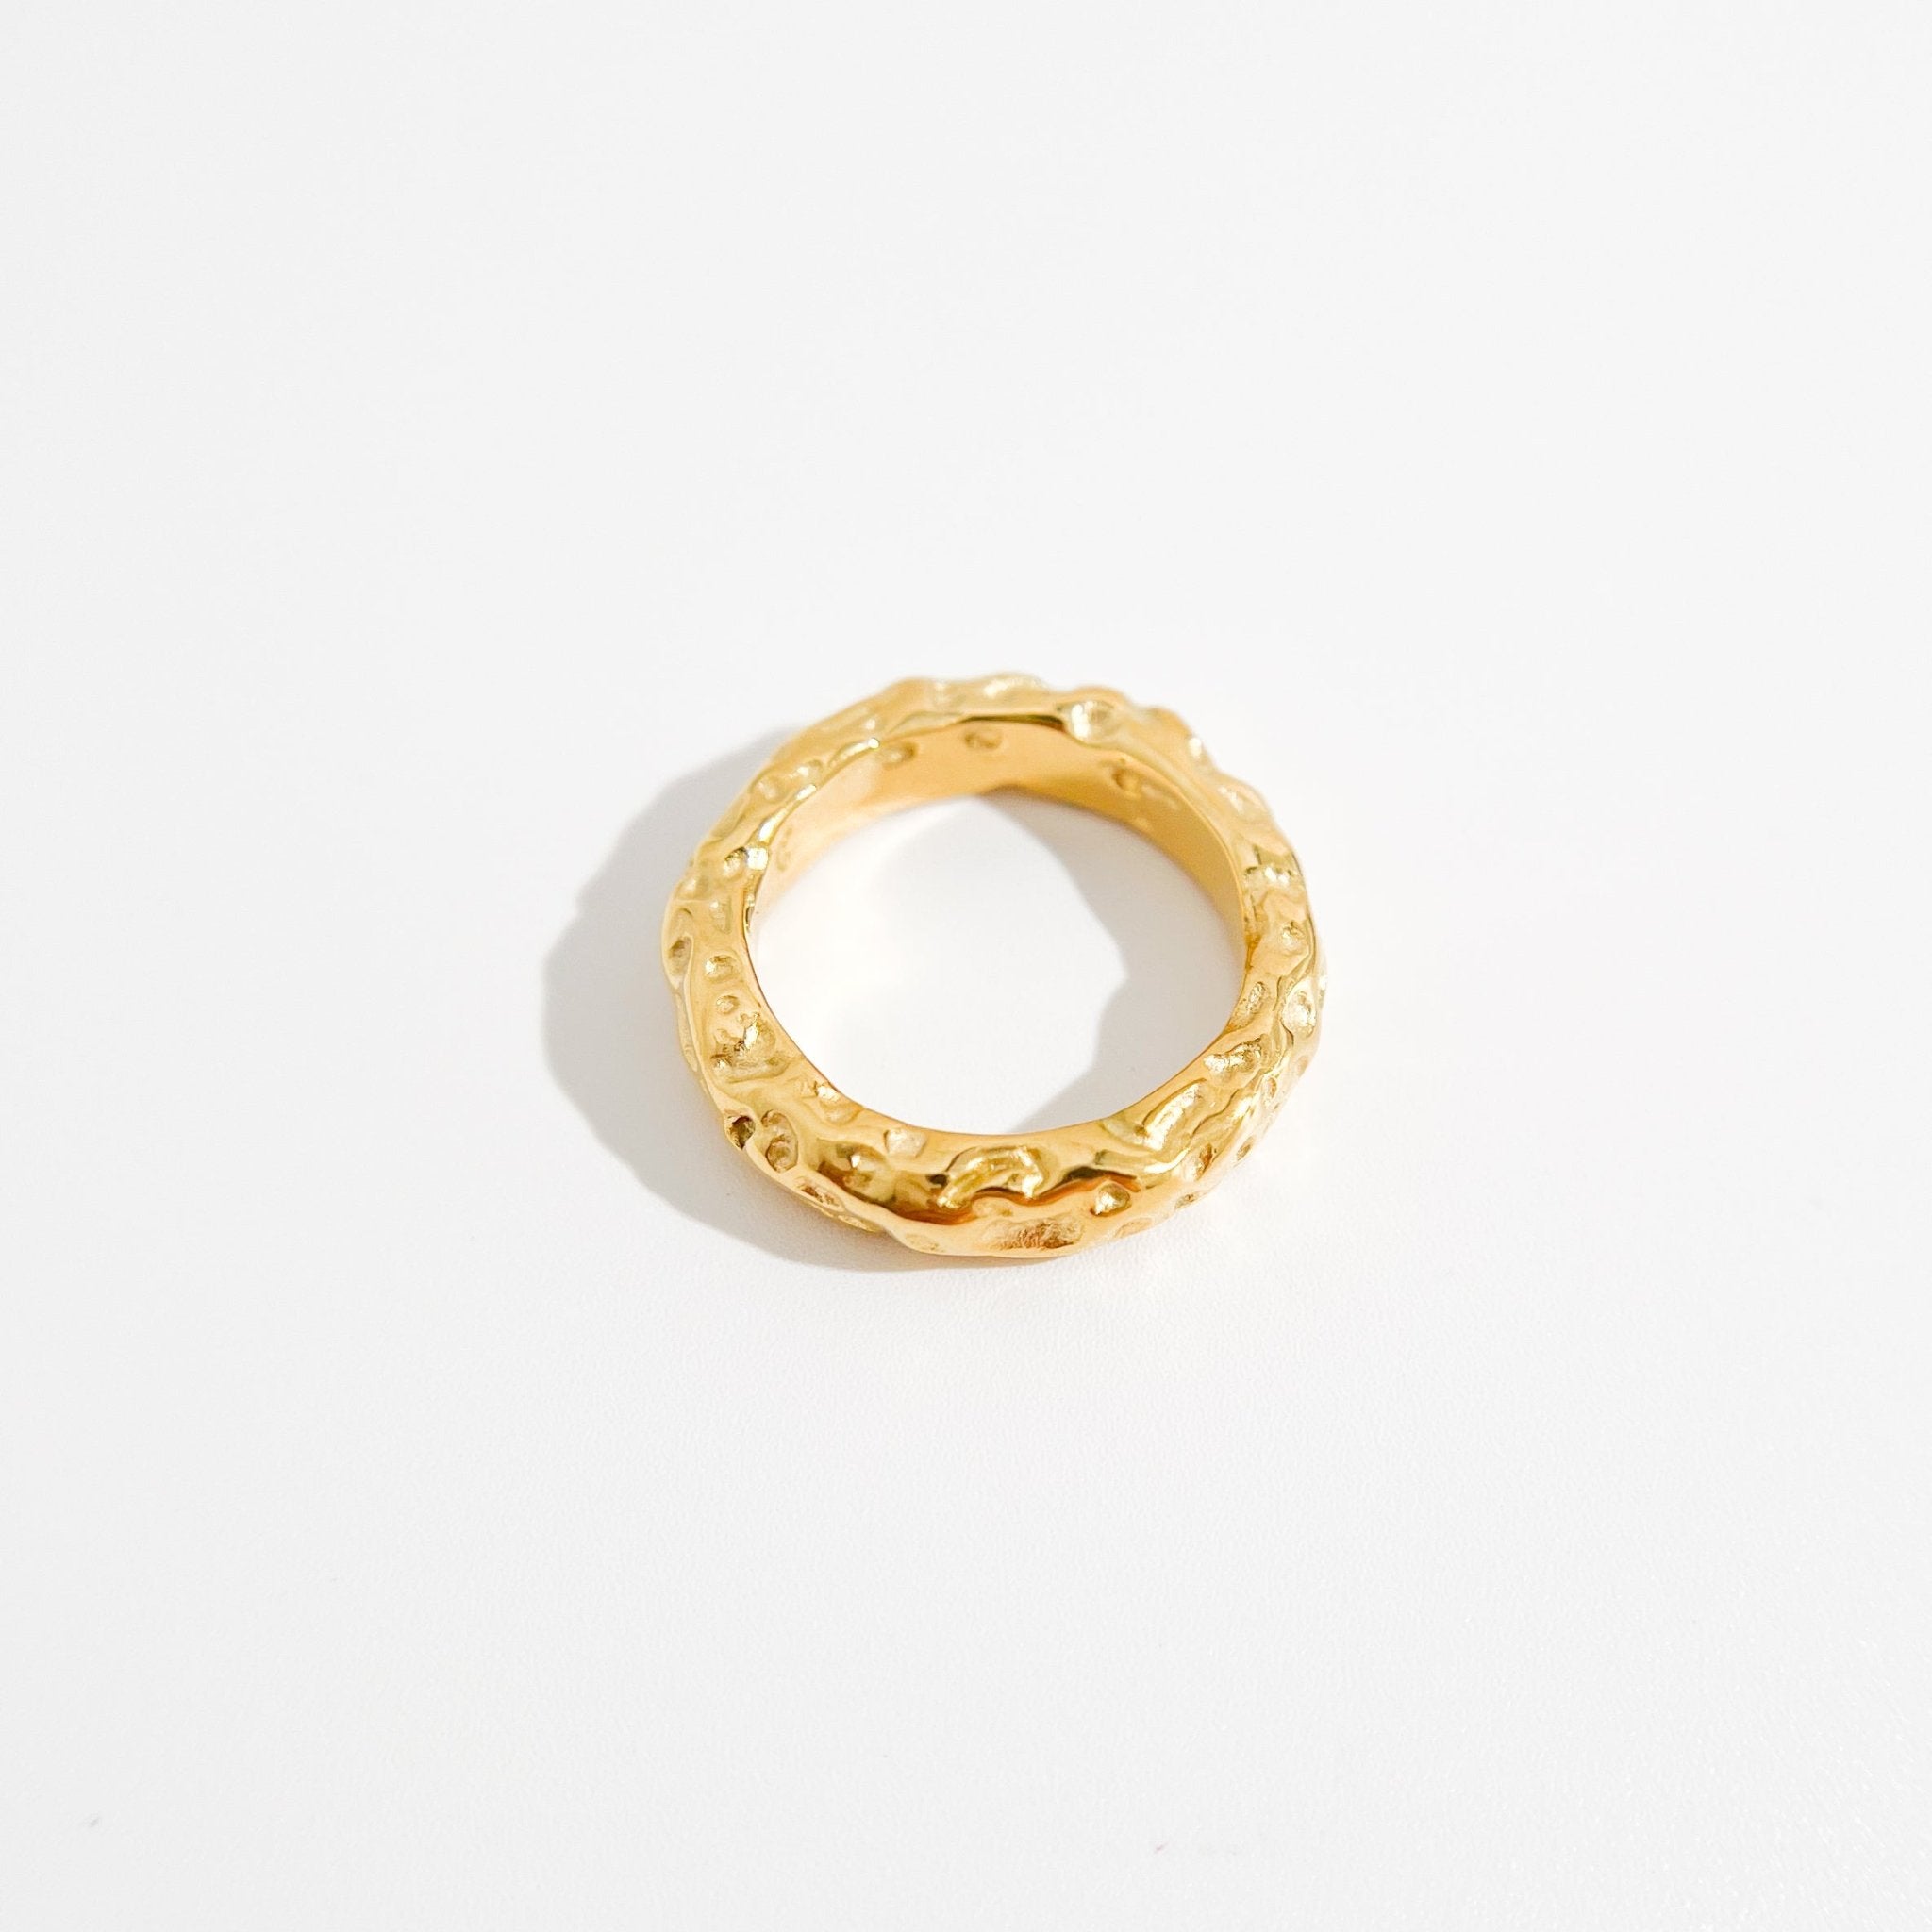 Hammered Ring in Gold - Flaire & Co.